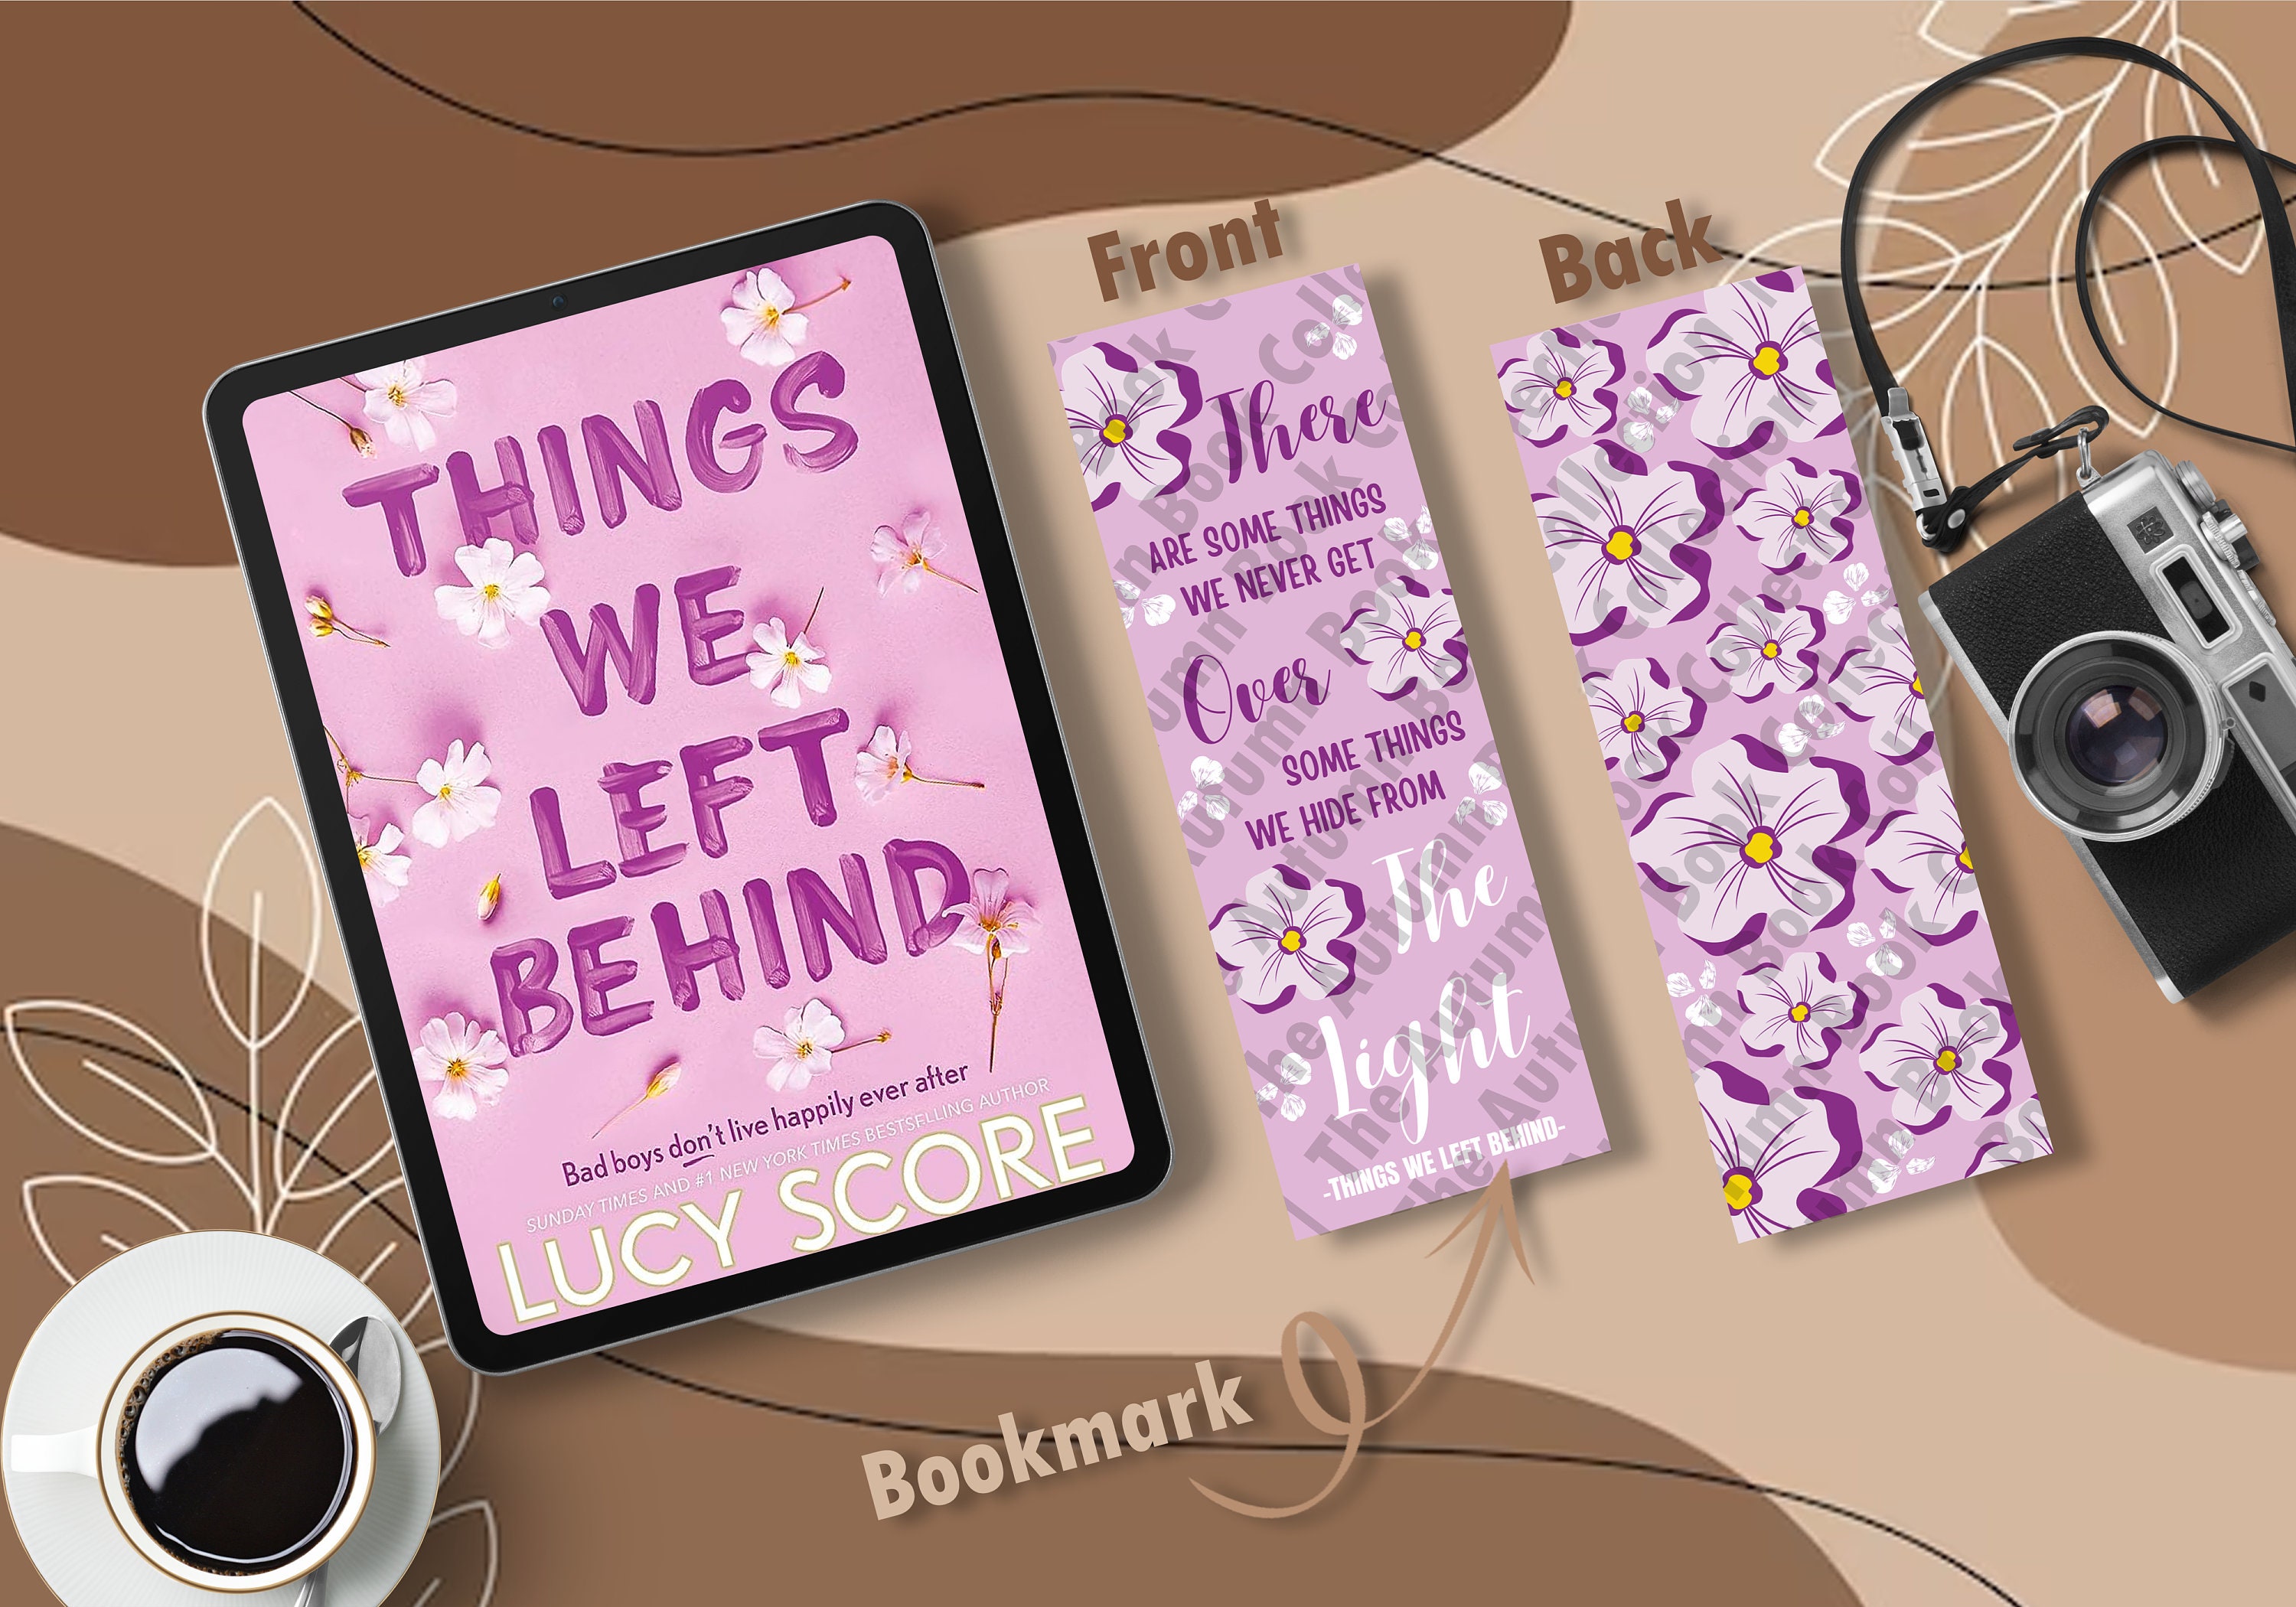 Things We Never Got Over Bookmark Things We Hide From Light Lucy Score  Bookmark Romance Bookmark 